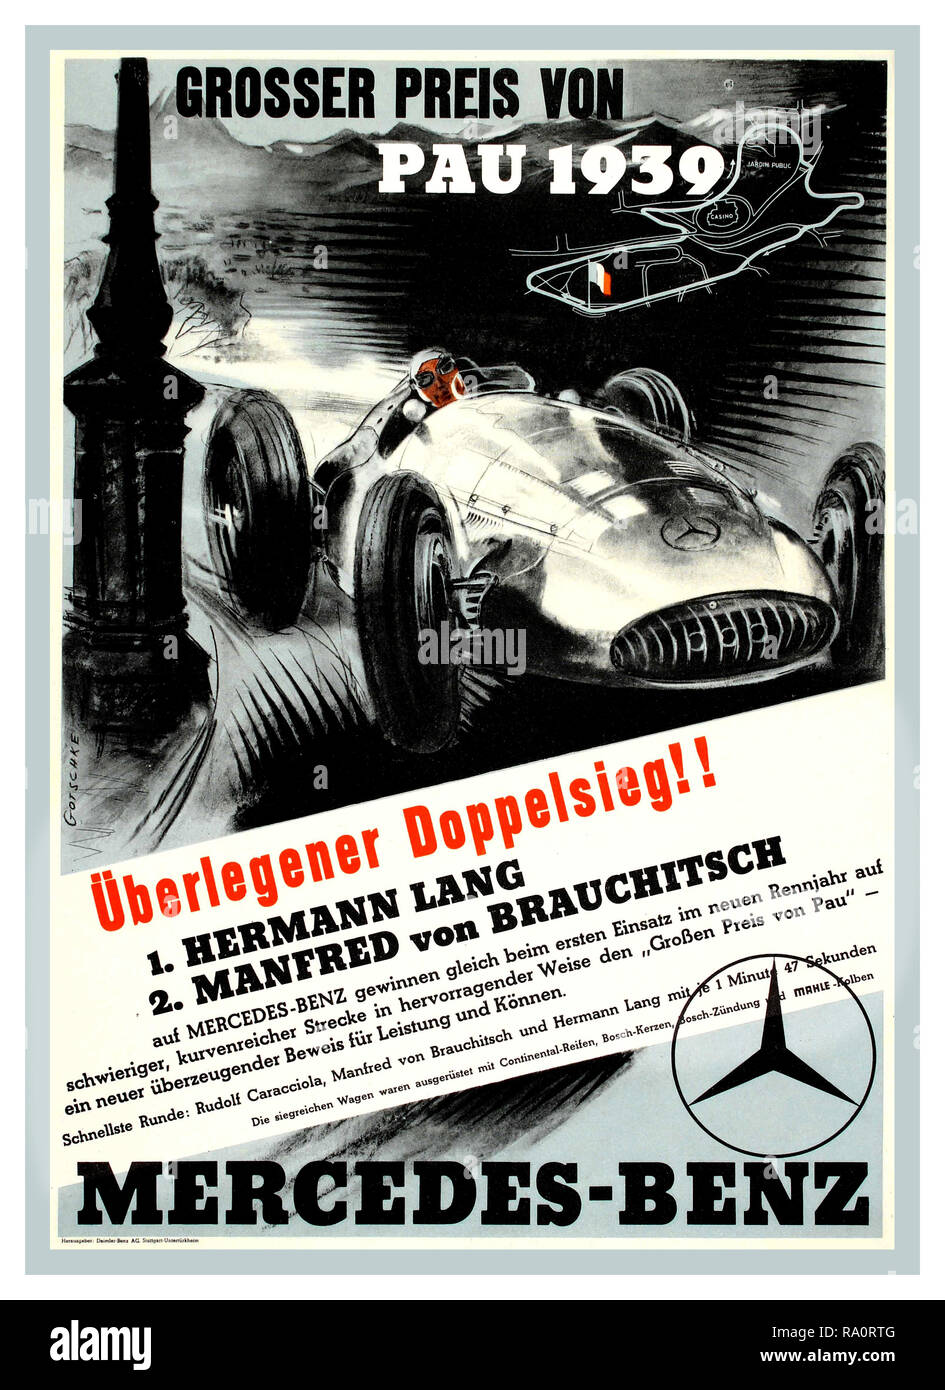 Vintage German Motor Racing Poster 1939 'Grosser Preis von Pau 1939' - Mercedes Benz motor racing poster. Original vintage motorsport poster promoting Mercedes-Benz at the Grosser Preis von Pau 1939, featuring German race drivers Hermann Lang and Manfred von Brauchitsch placed First and Second driving Mercedes Silver Arrows Racing Cars. The Pau Grand Prix is a motor race held in Pau, in the Pyrénées-Atlantiques department of southwestern France Stock Photo